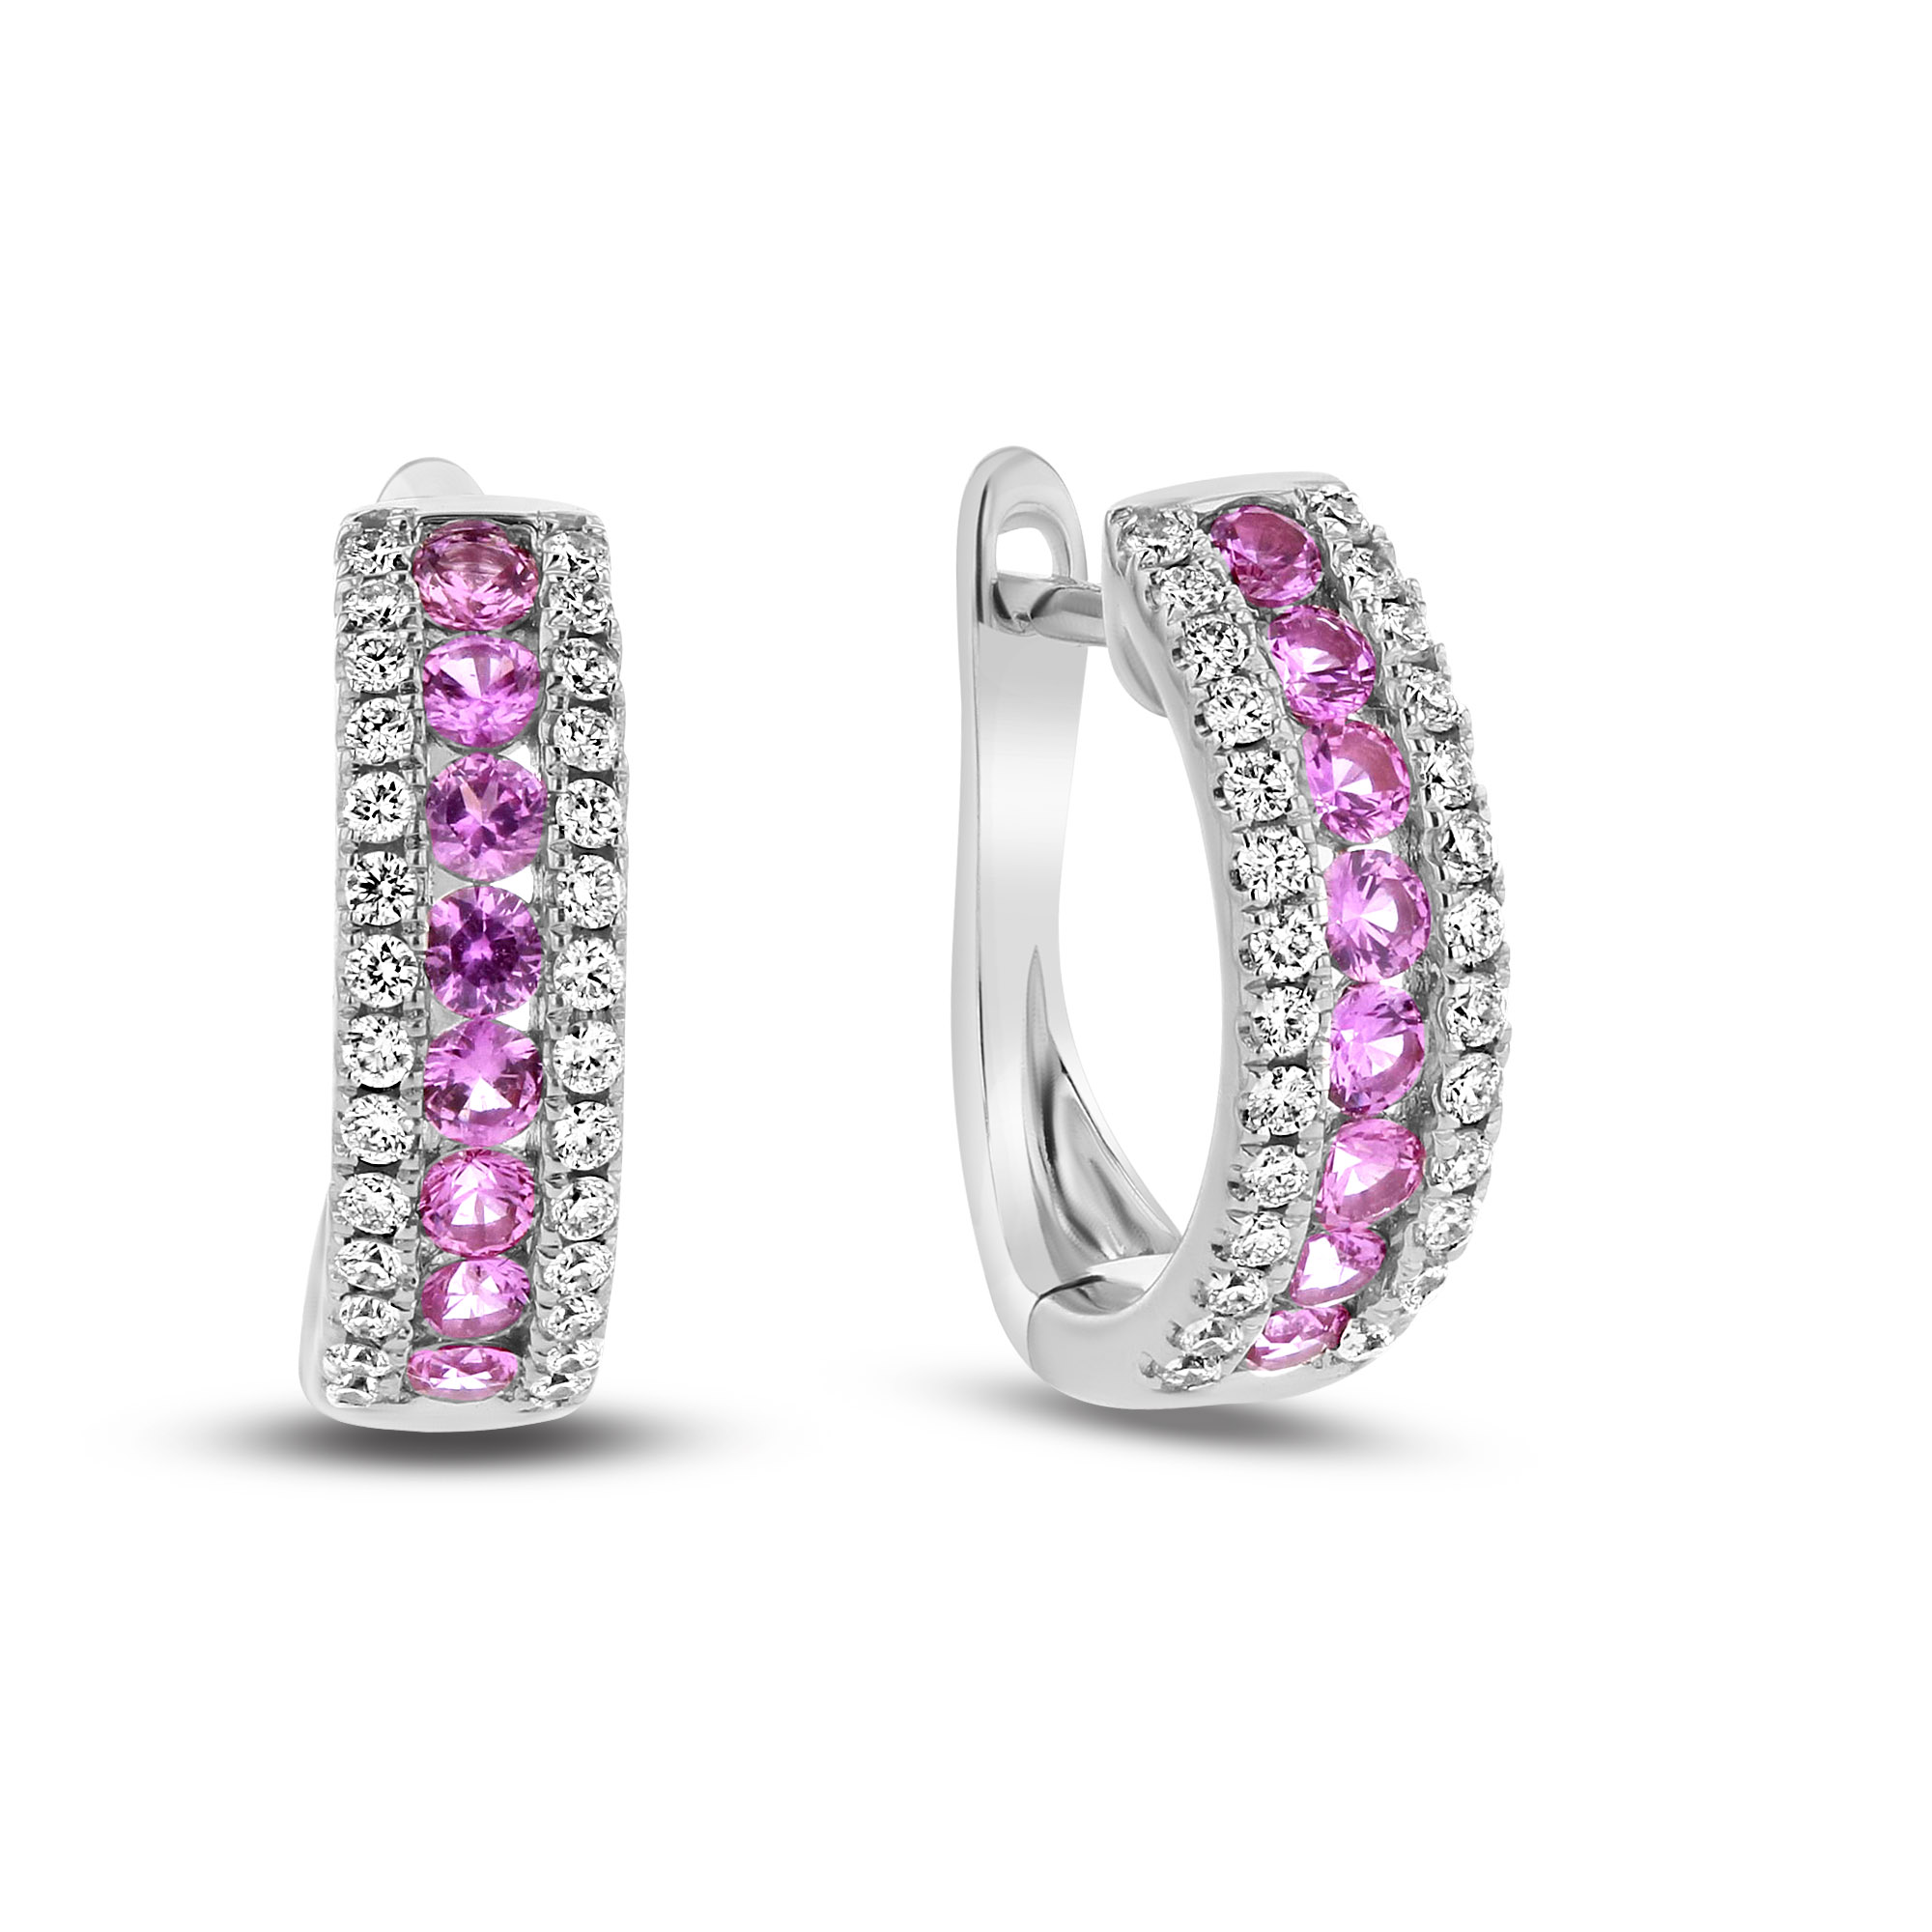 View 0.92ctw Diamond and Pink Saphire Hoop Earrings in 18k White Gold